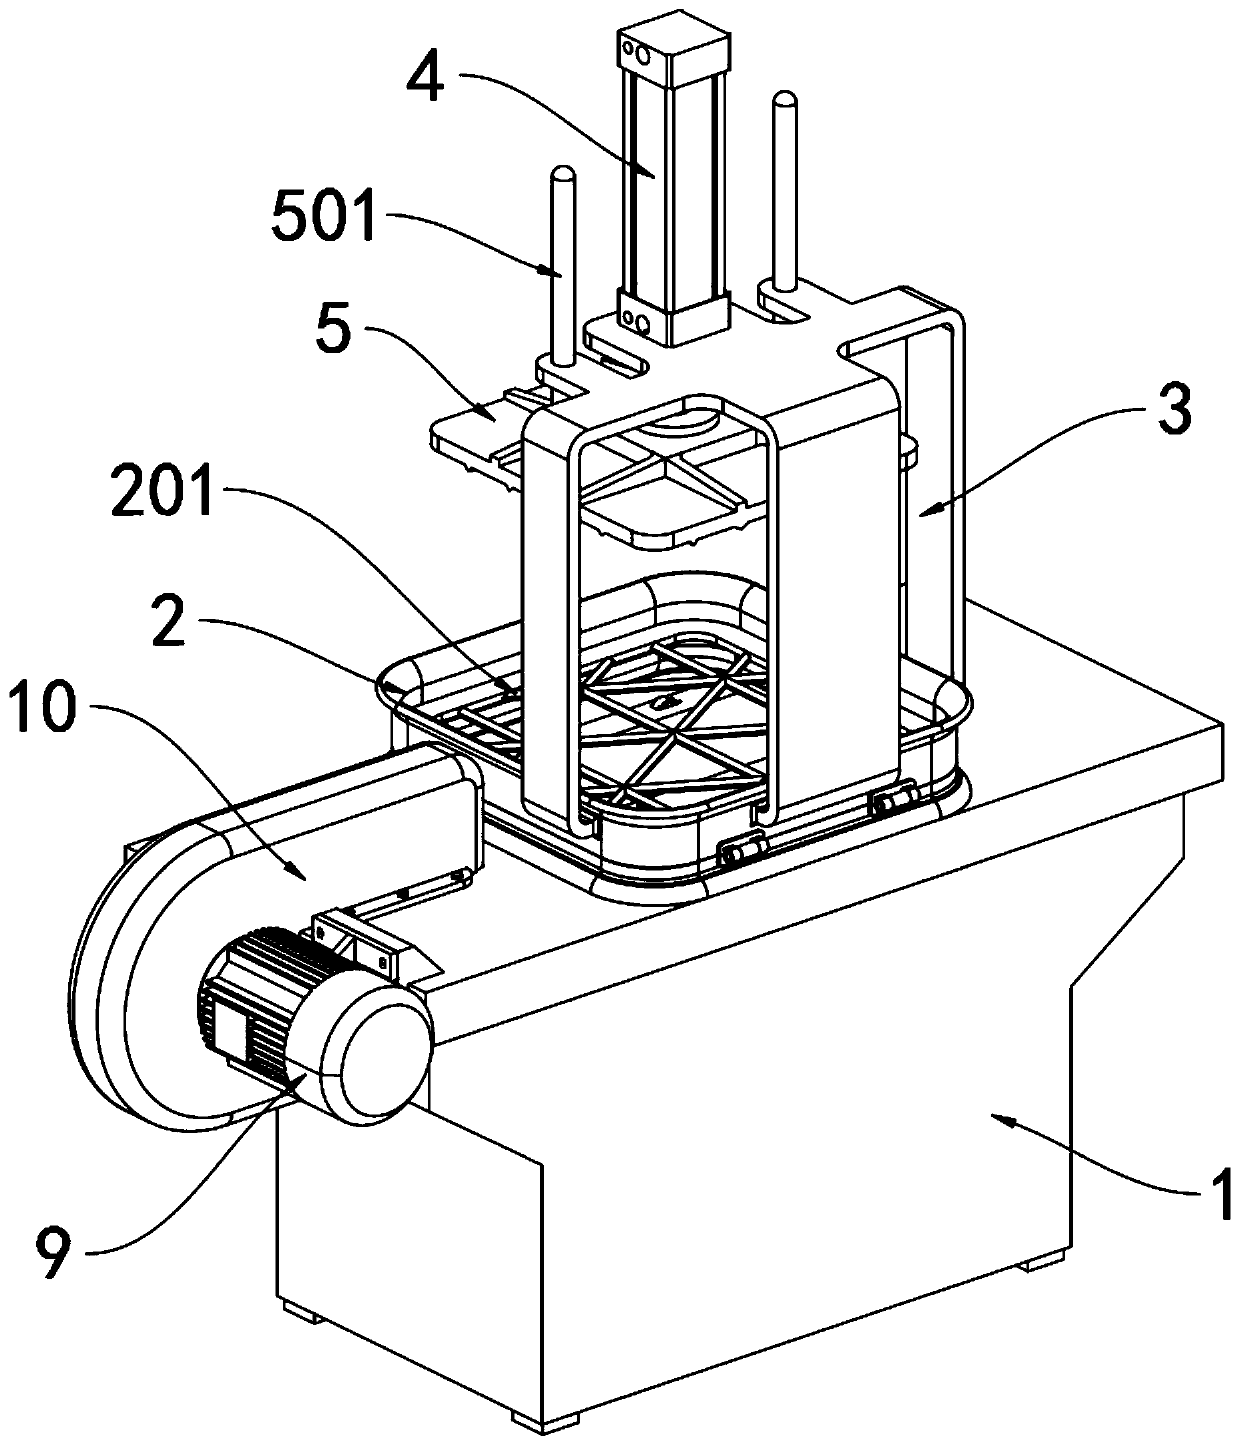 Auxiliary device for casting sand discharge after casting forming of castings